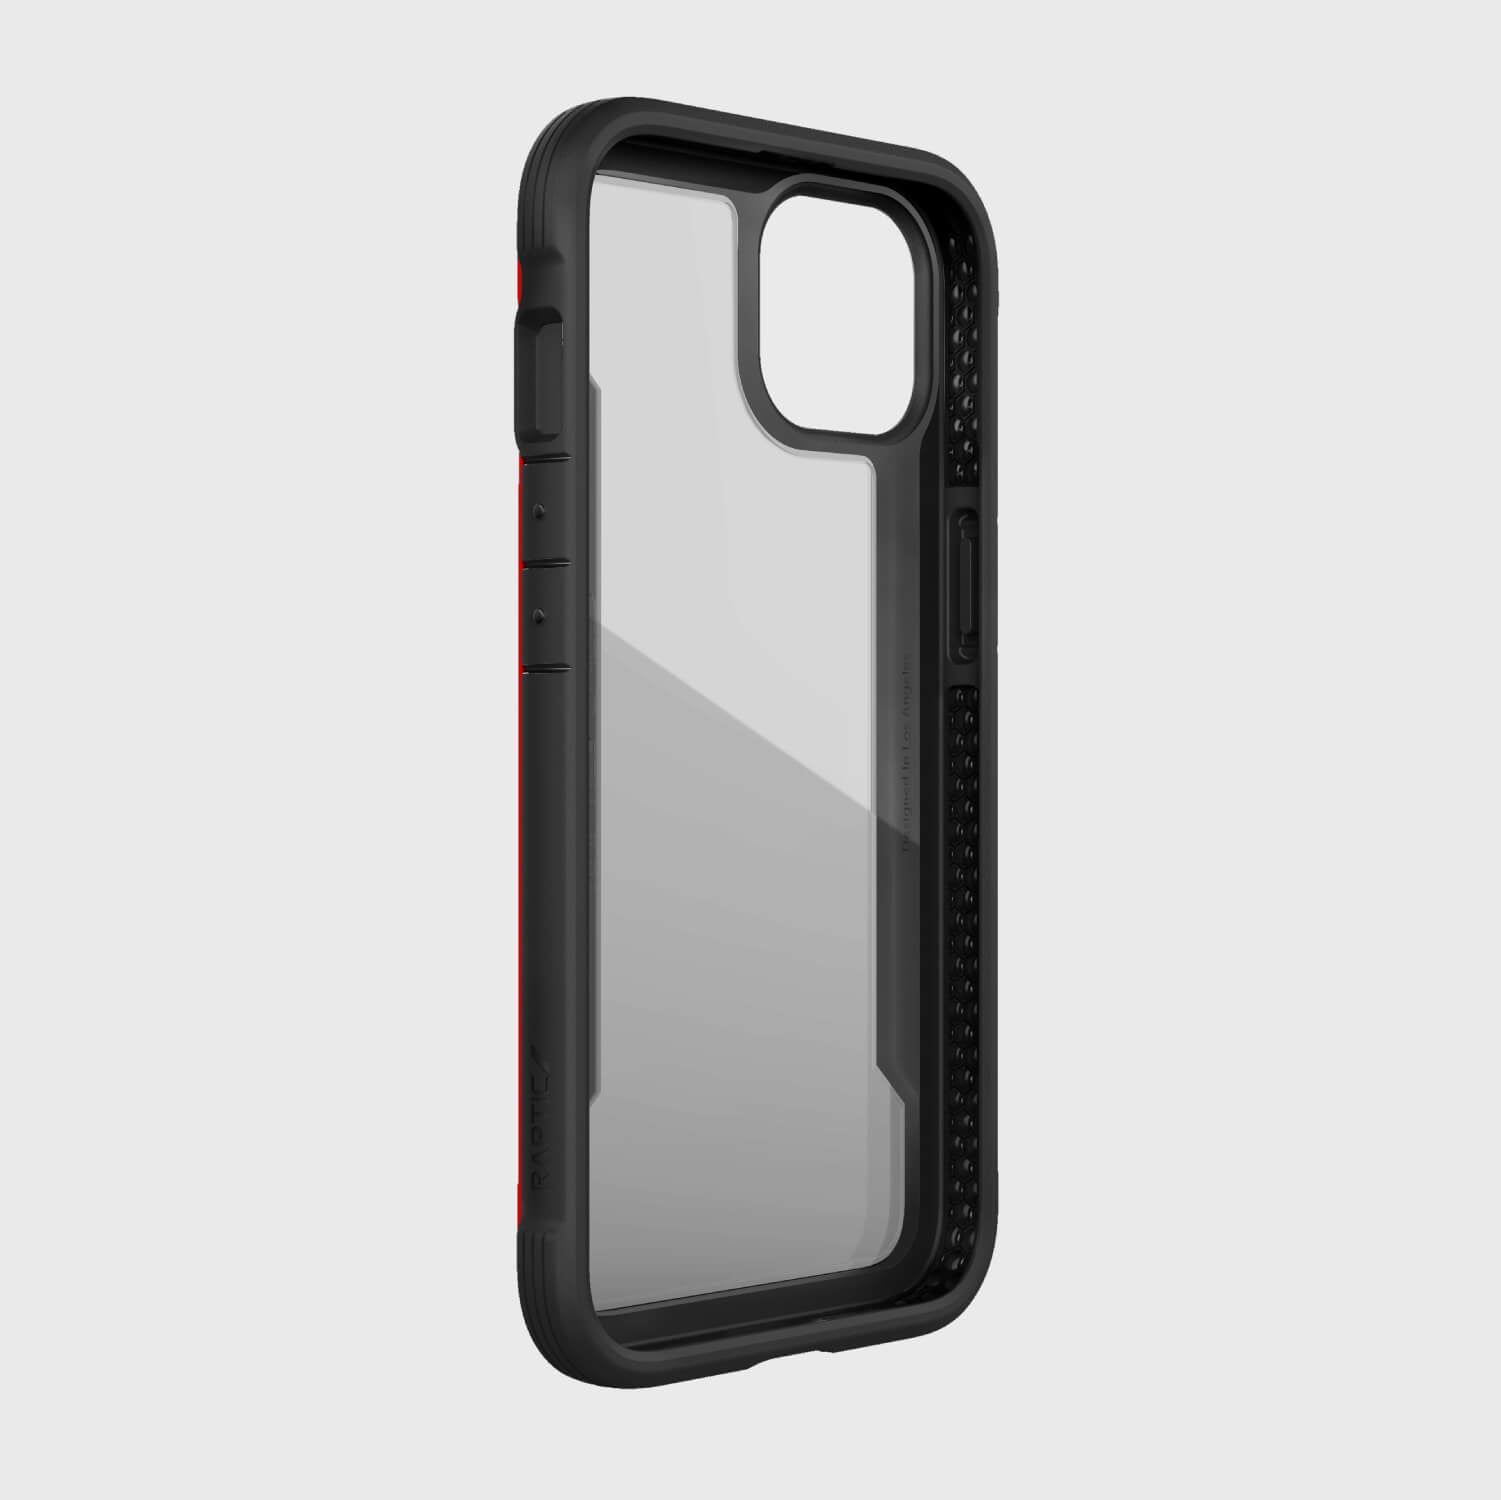 The iPhone 13 Mini Case - SHIELD PRO by Raptic is black and red.